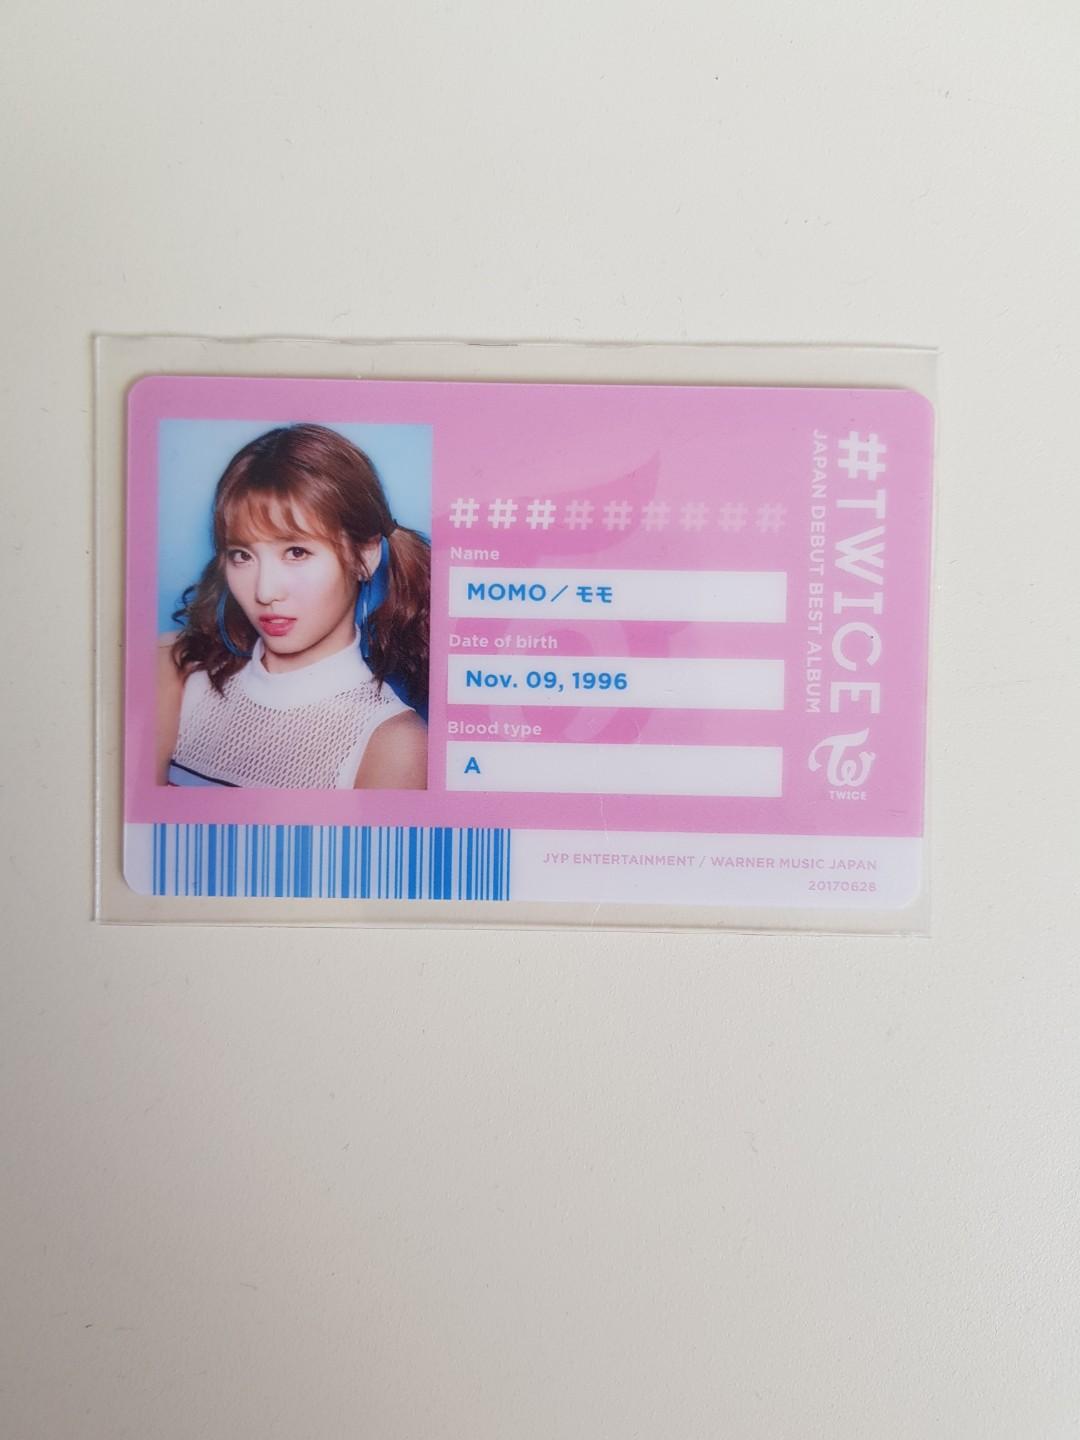 Selling Twice Momo Id Card Hobbies Toys Memorabilia Collectibles K Wave On Carousell